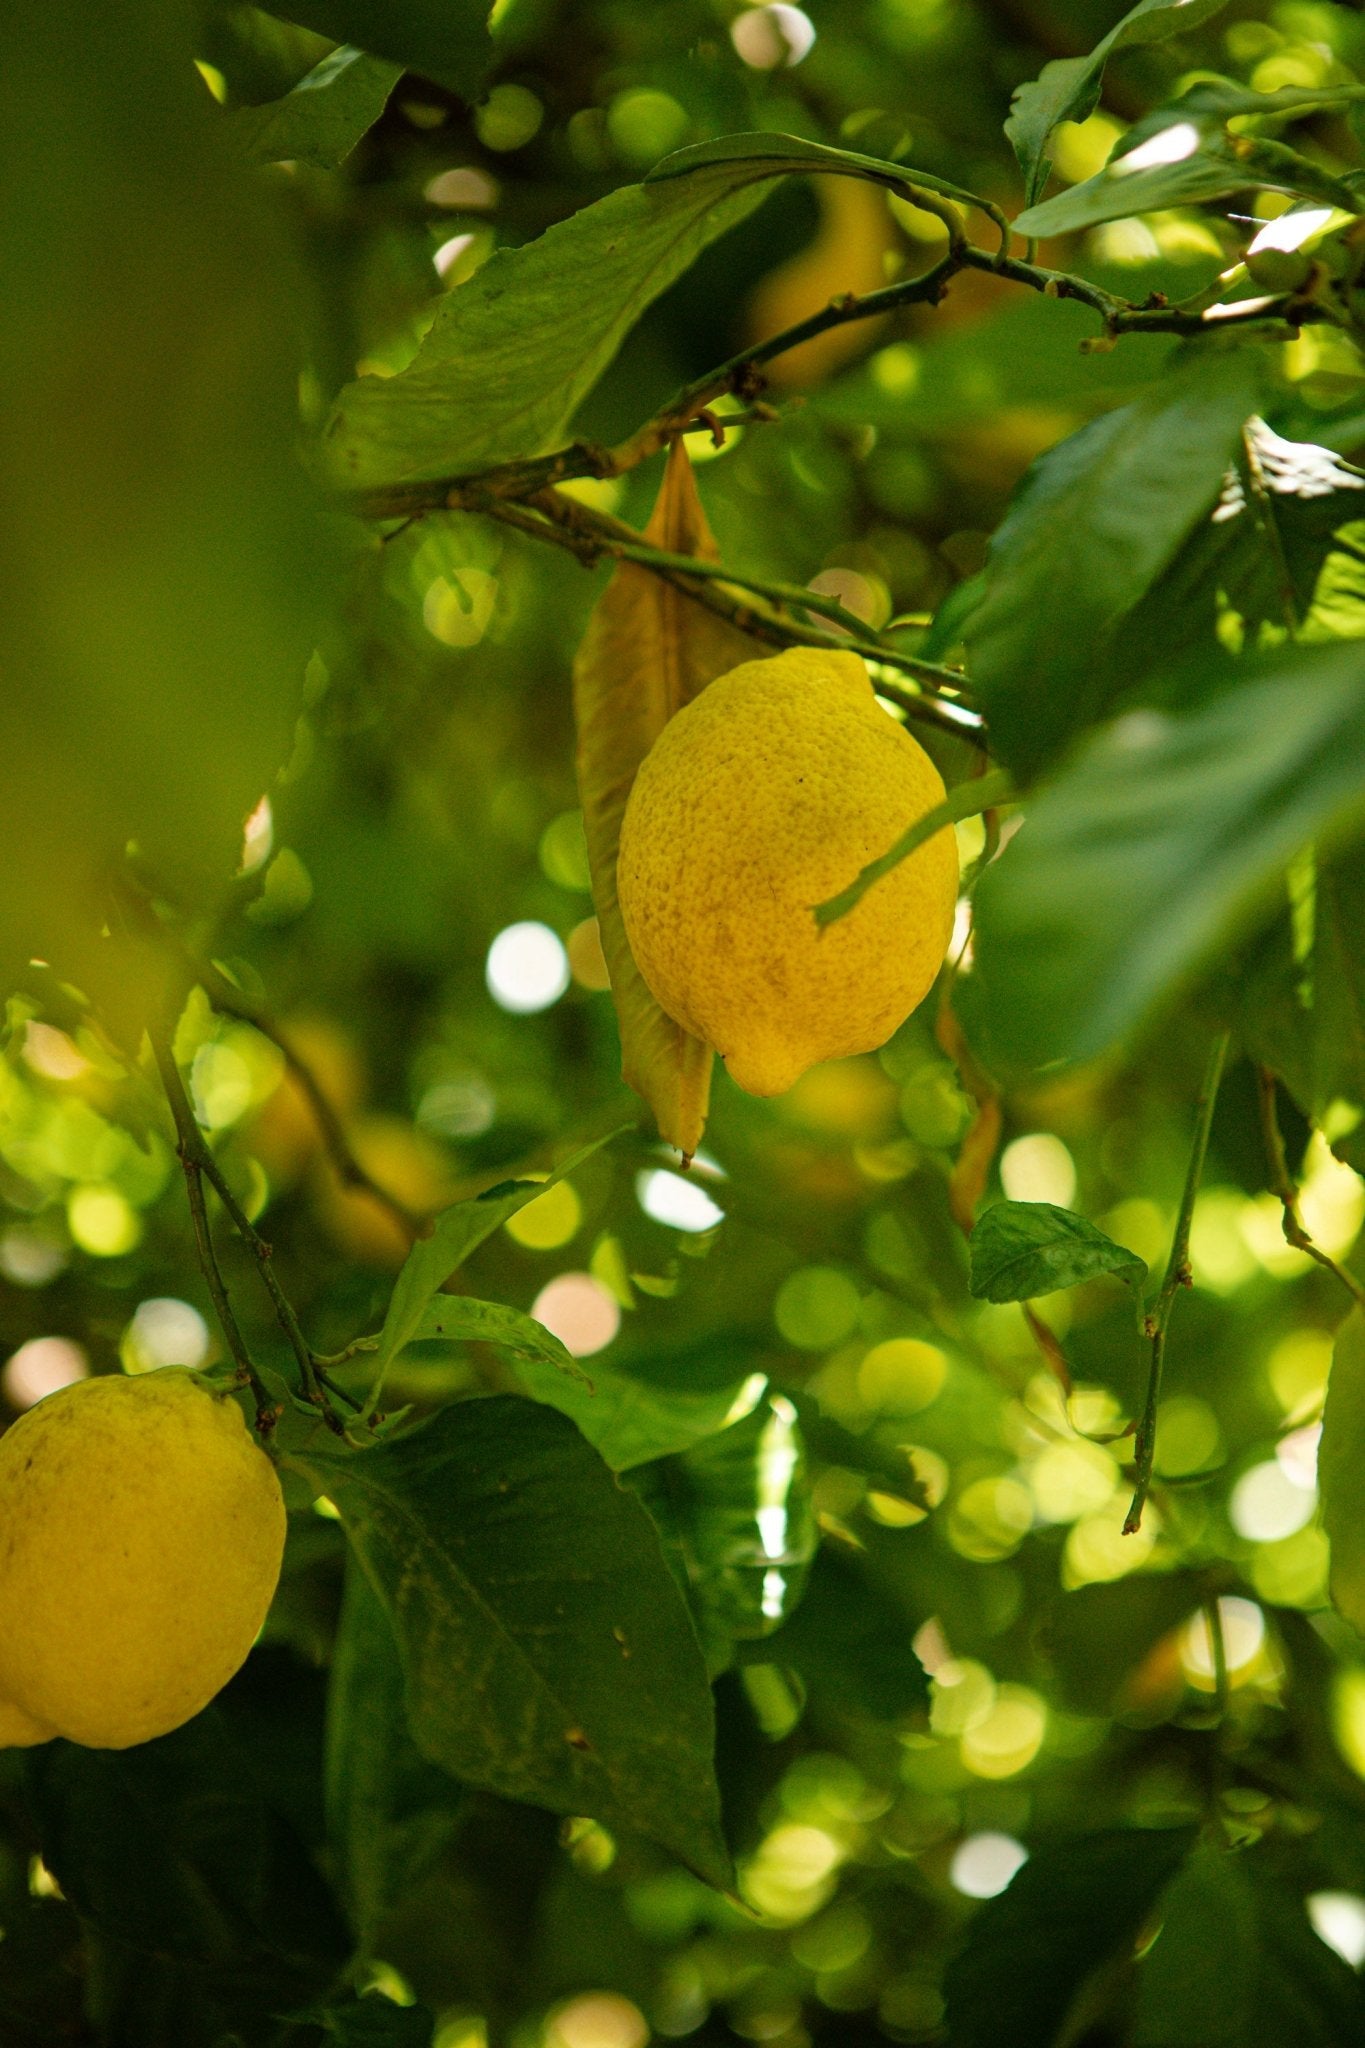 Don’t Let Lemons Go Off. Here are 5 Ways To Use Them Up - Gewürzhaus